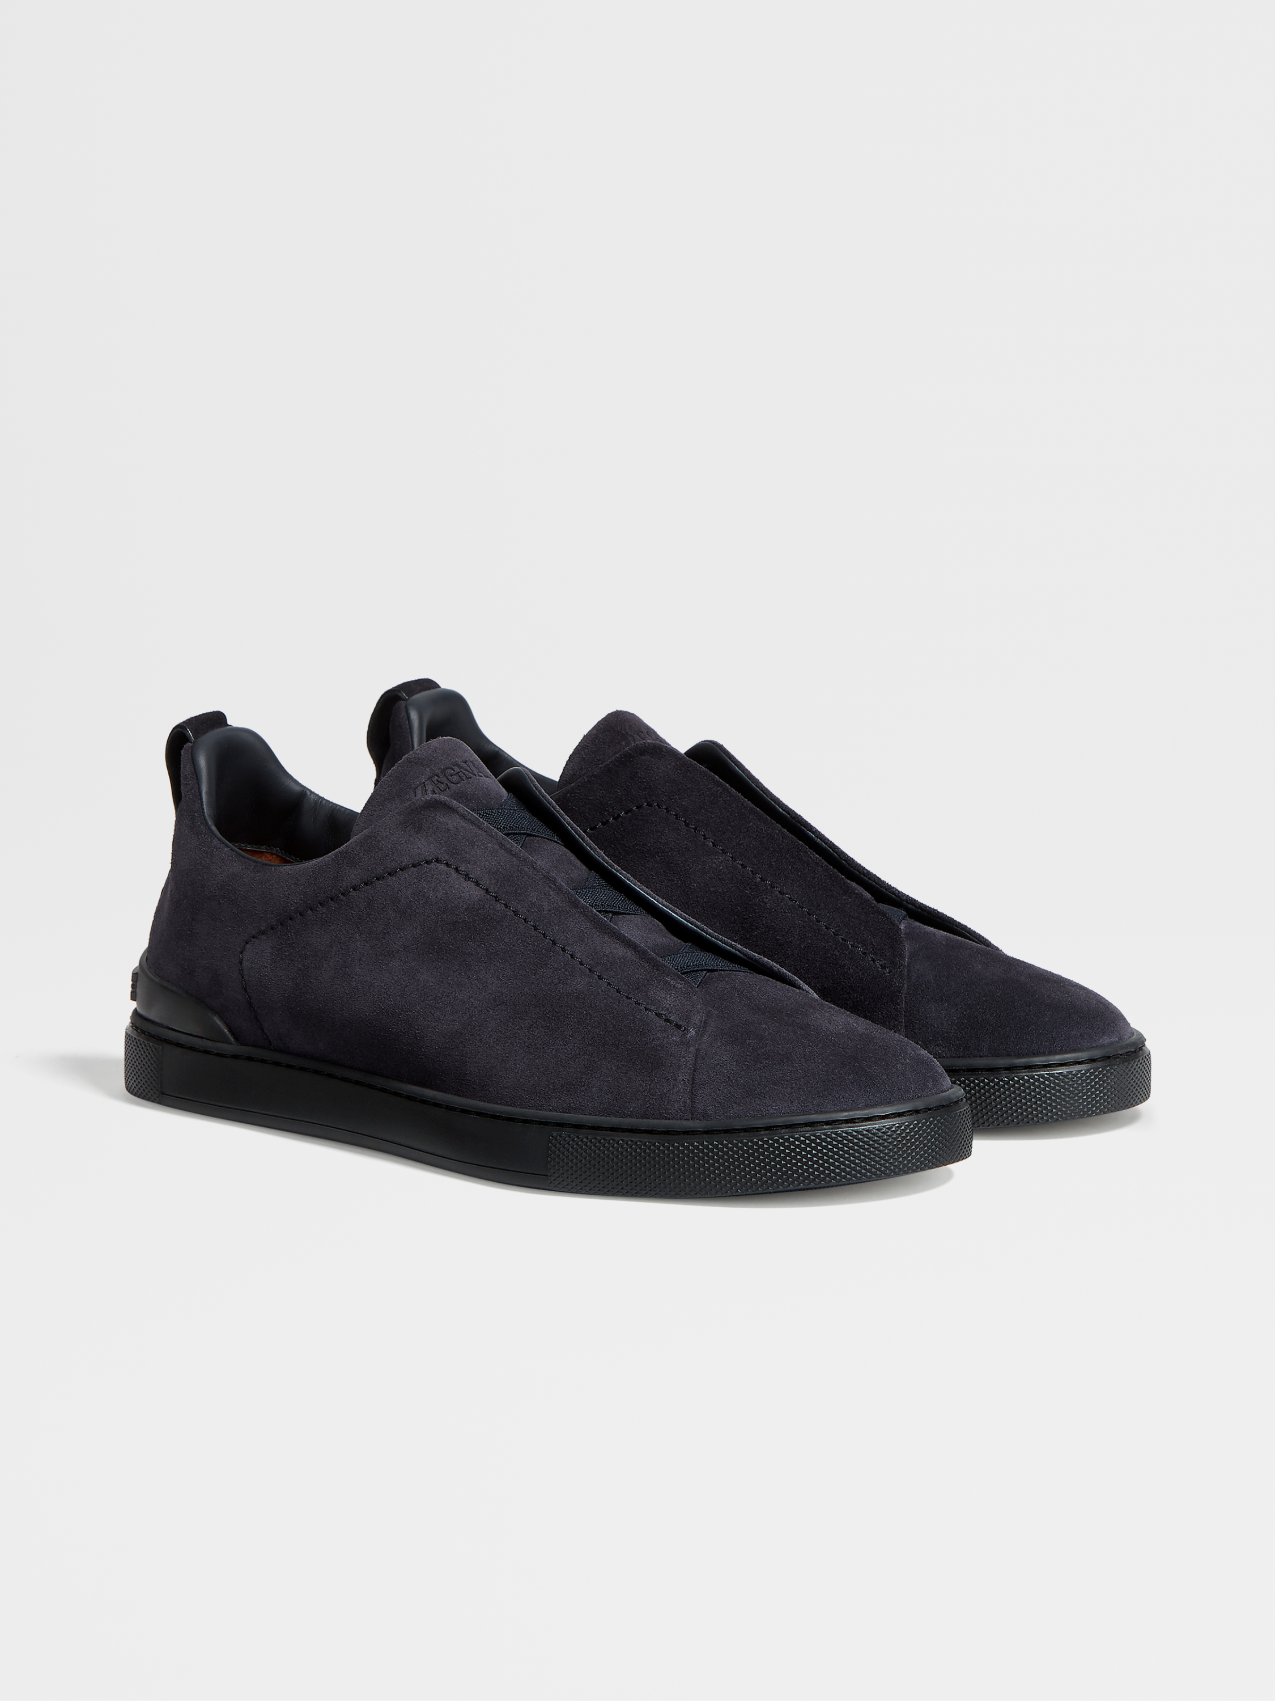 Navy Blue Suede Triple Stitch™ Low Top Sneakers